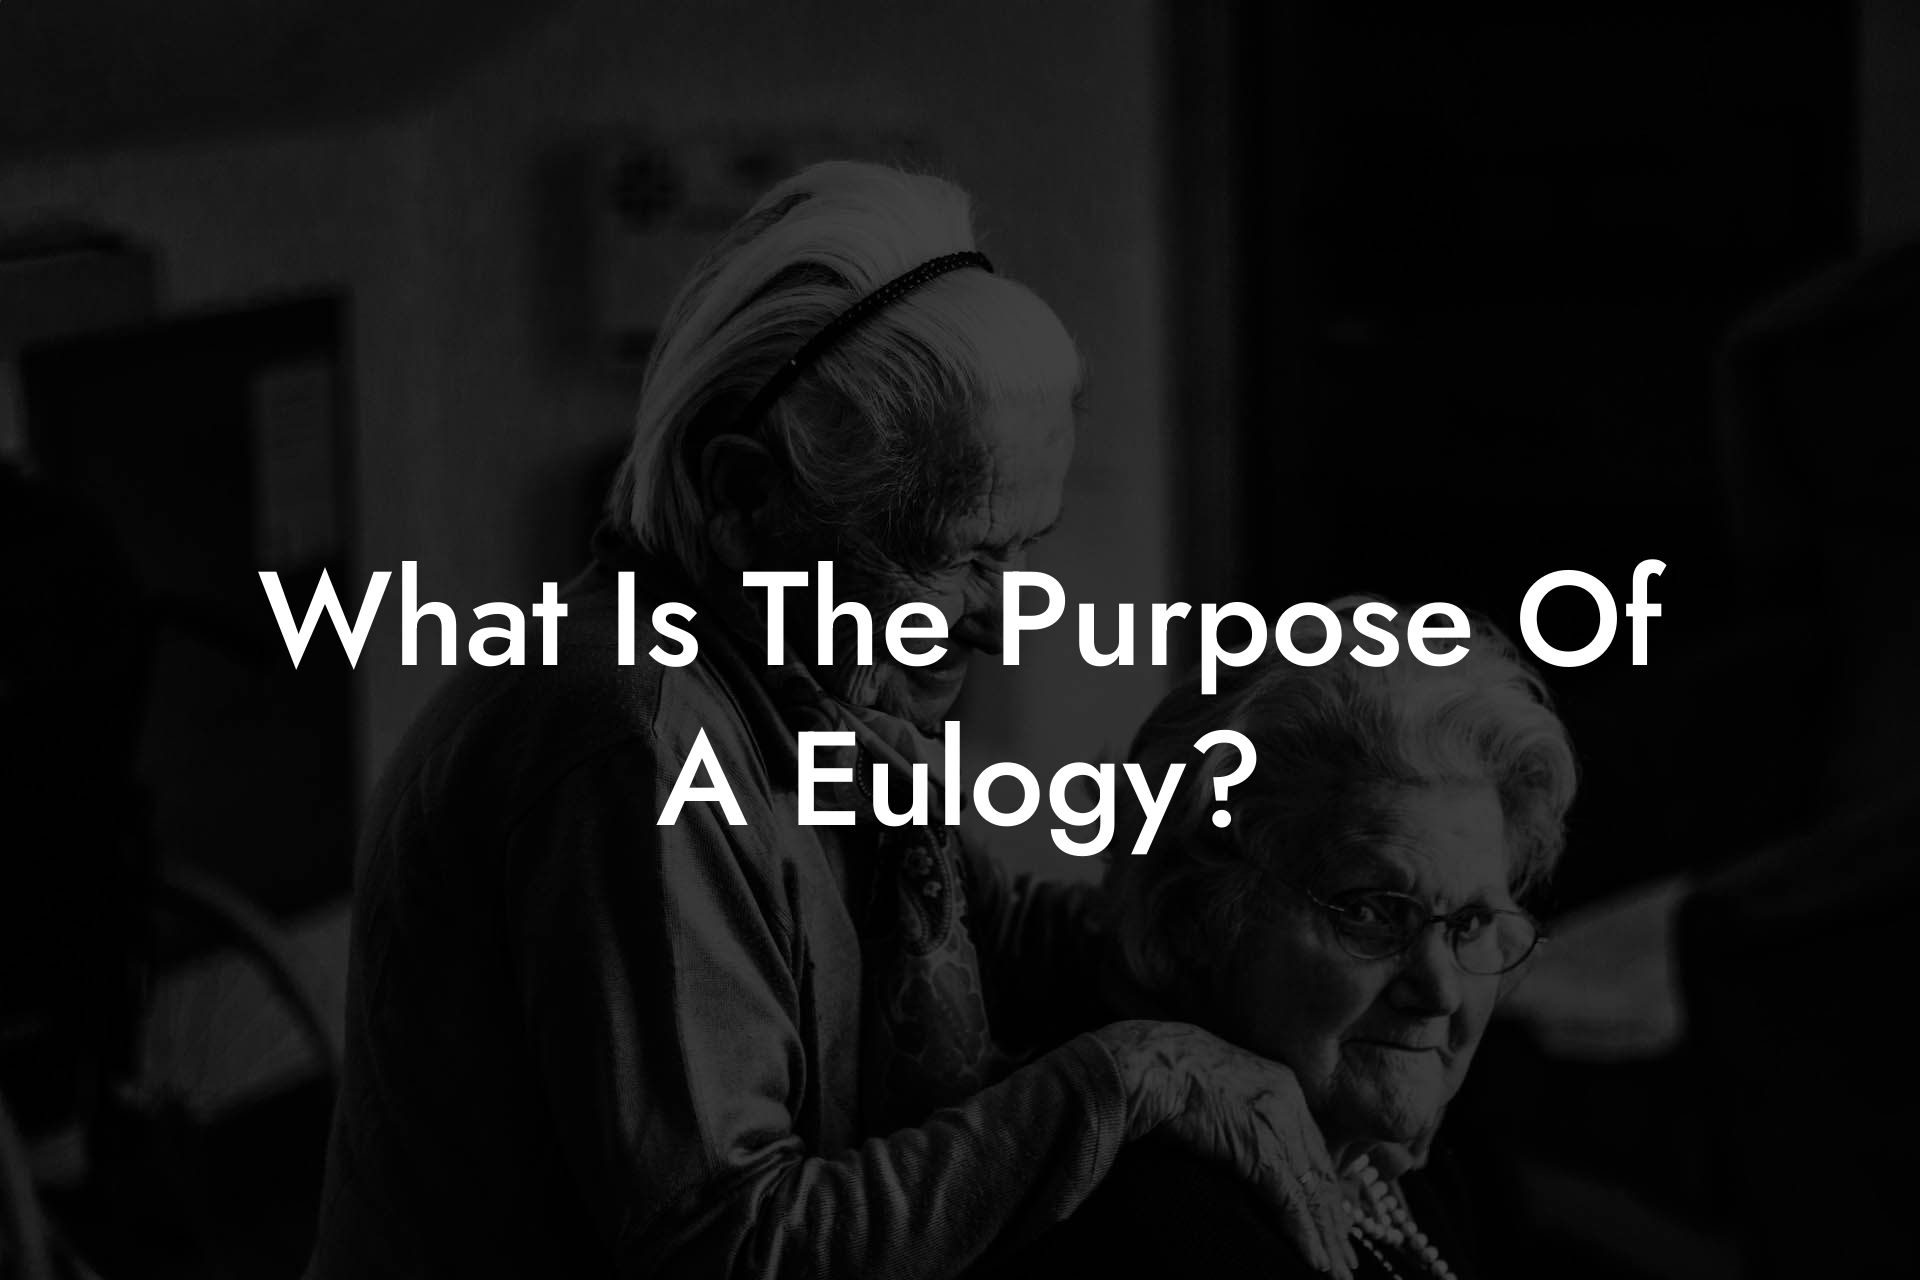 What Is The Purpose Of A Eulogy